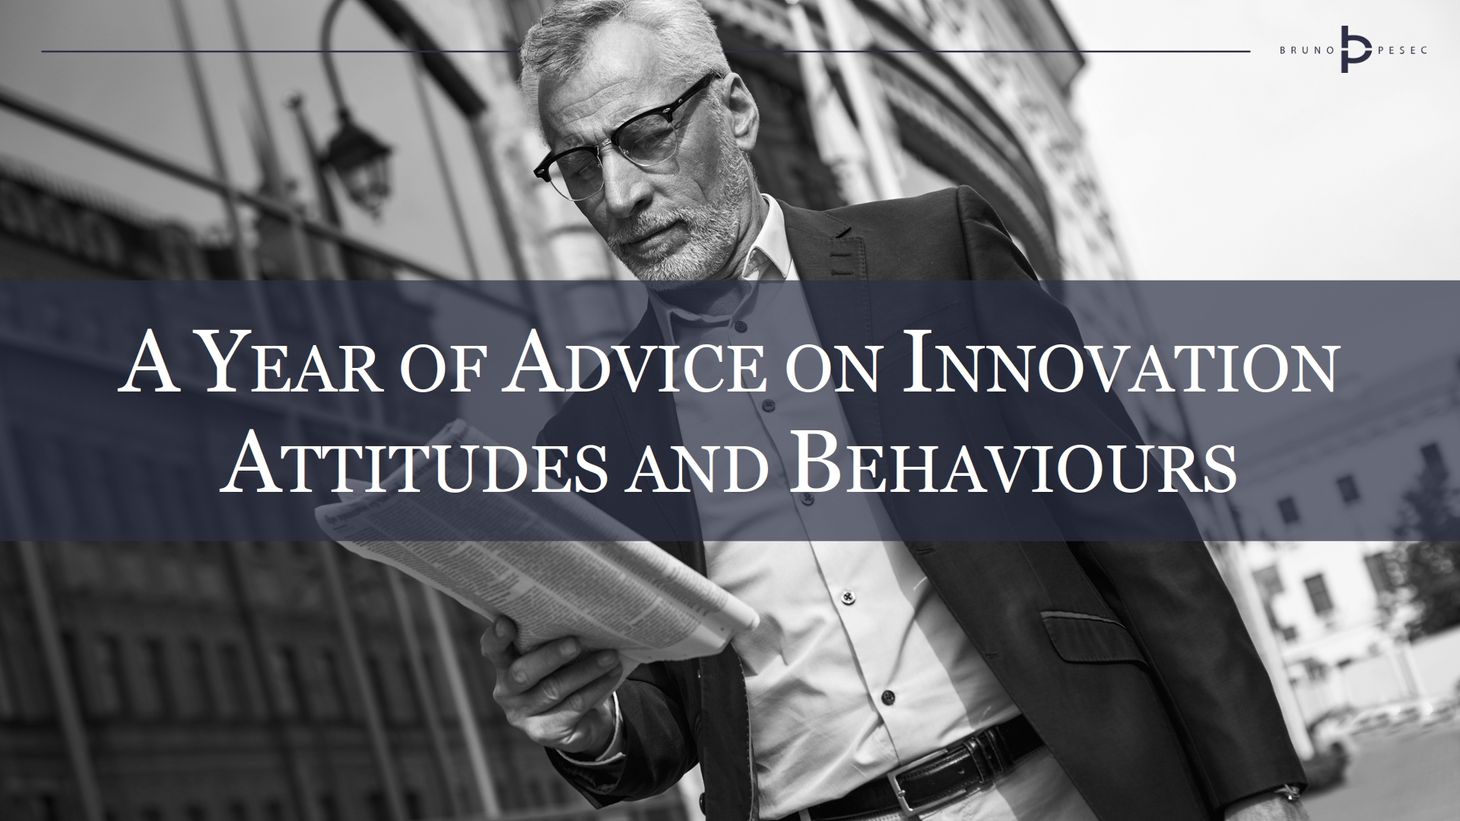 A year of advice on innovation attitudes and behaviours